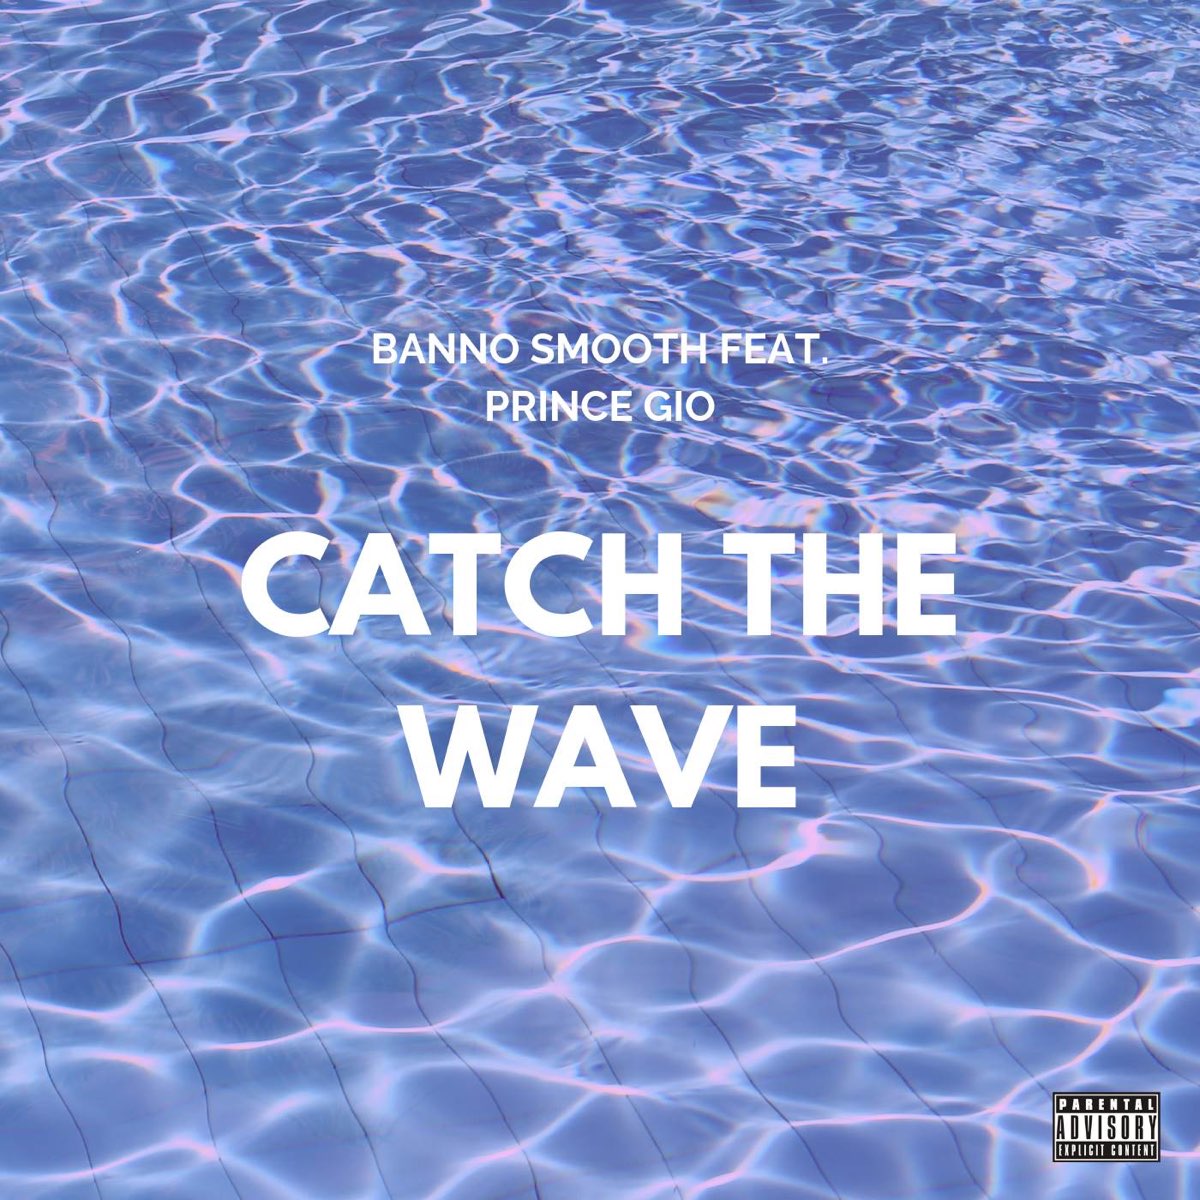 Catch the Wave (feat. Prince Gio) - Single by Banno Smooth on Apple Music